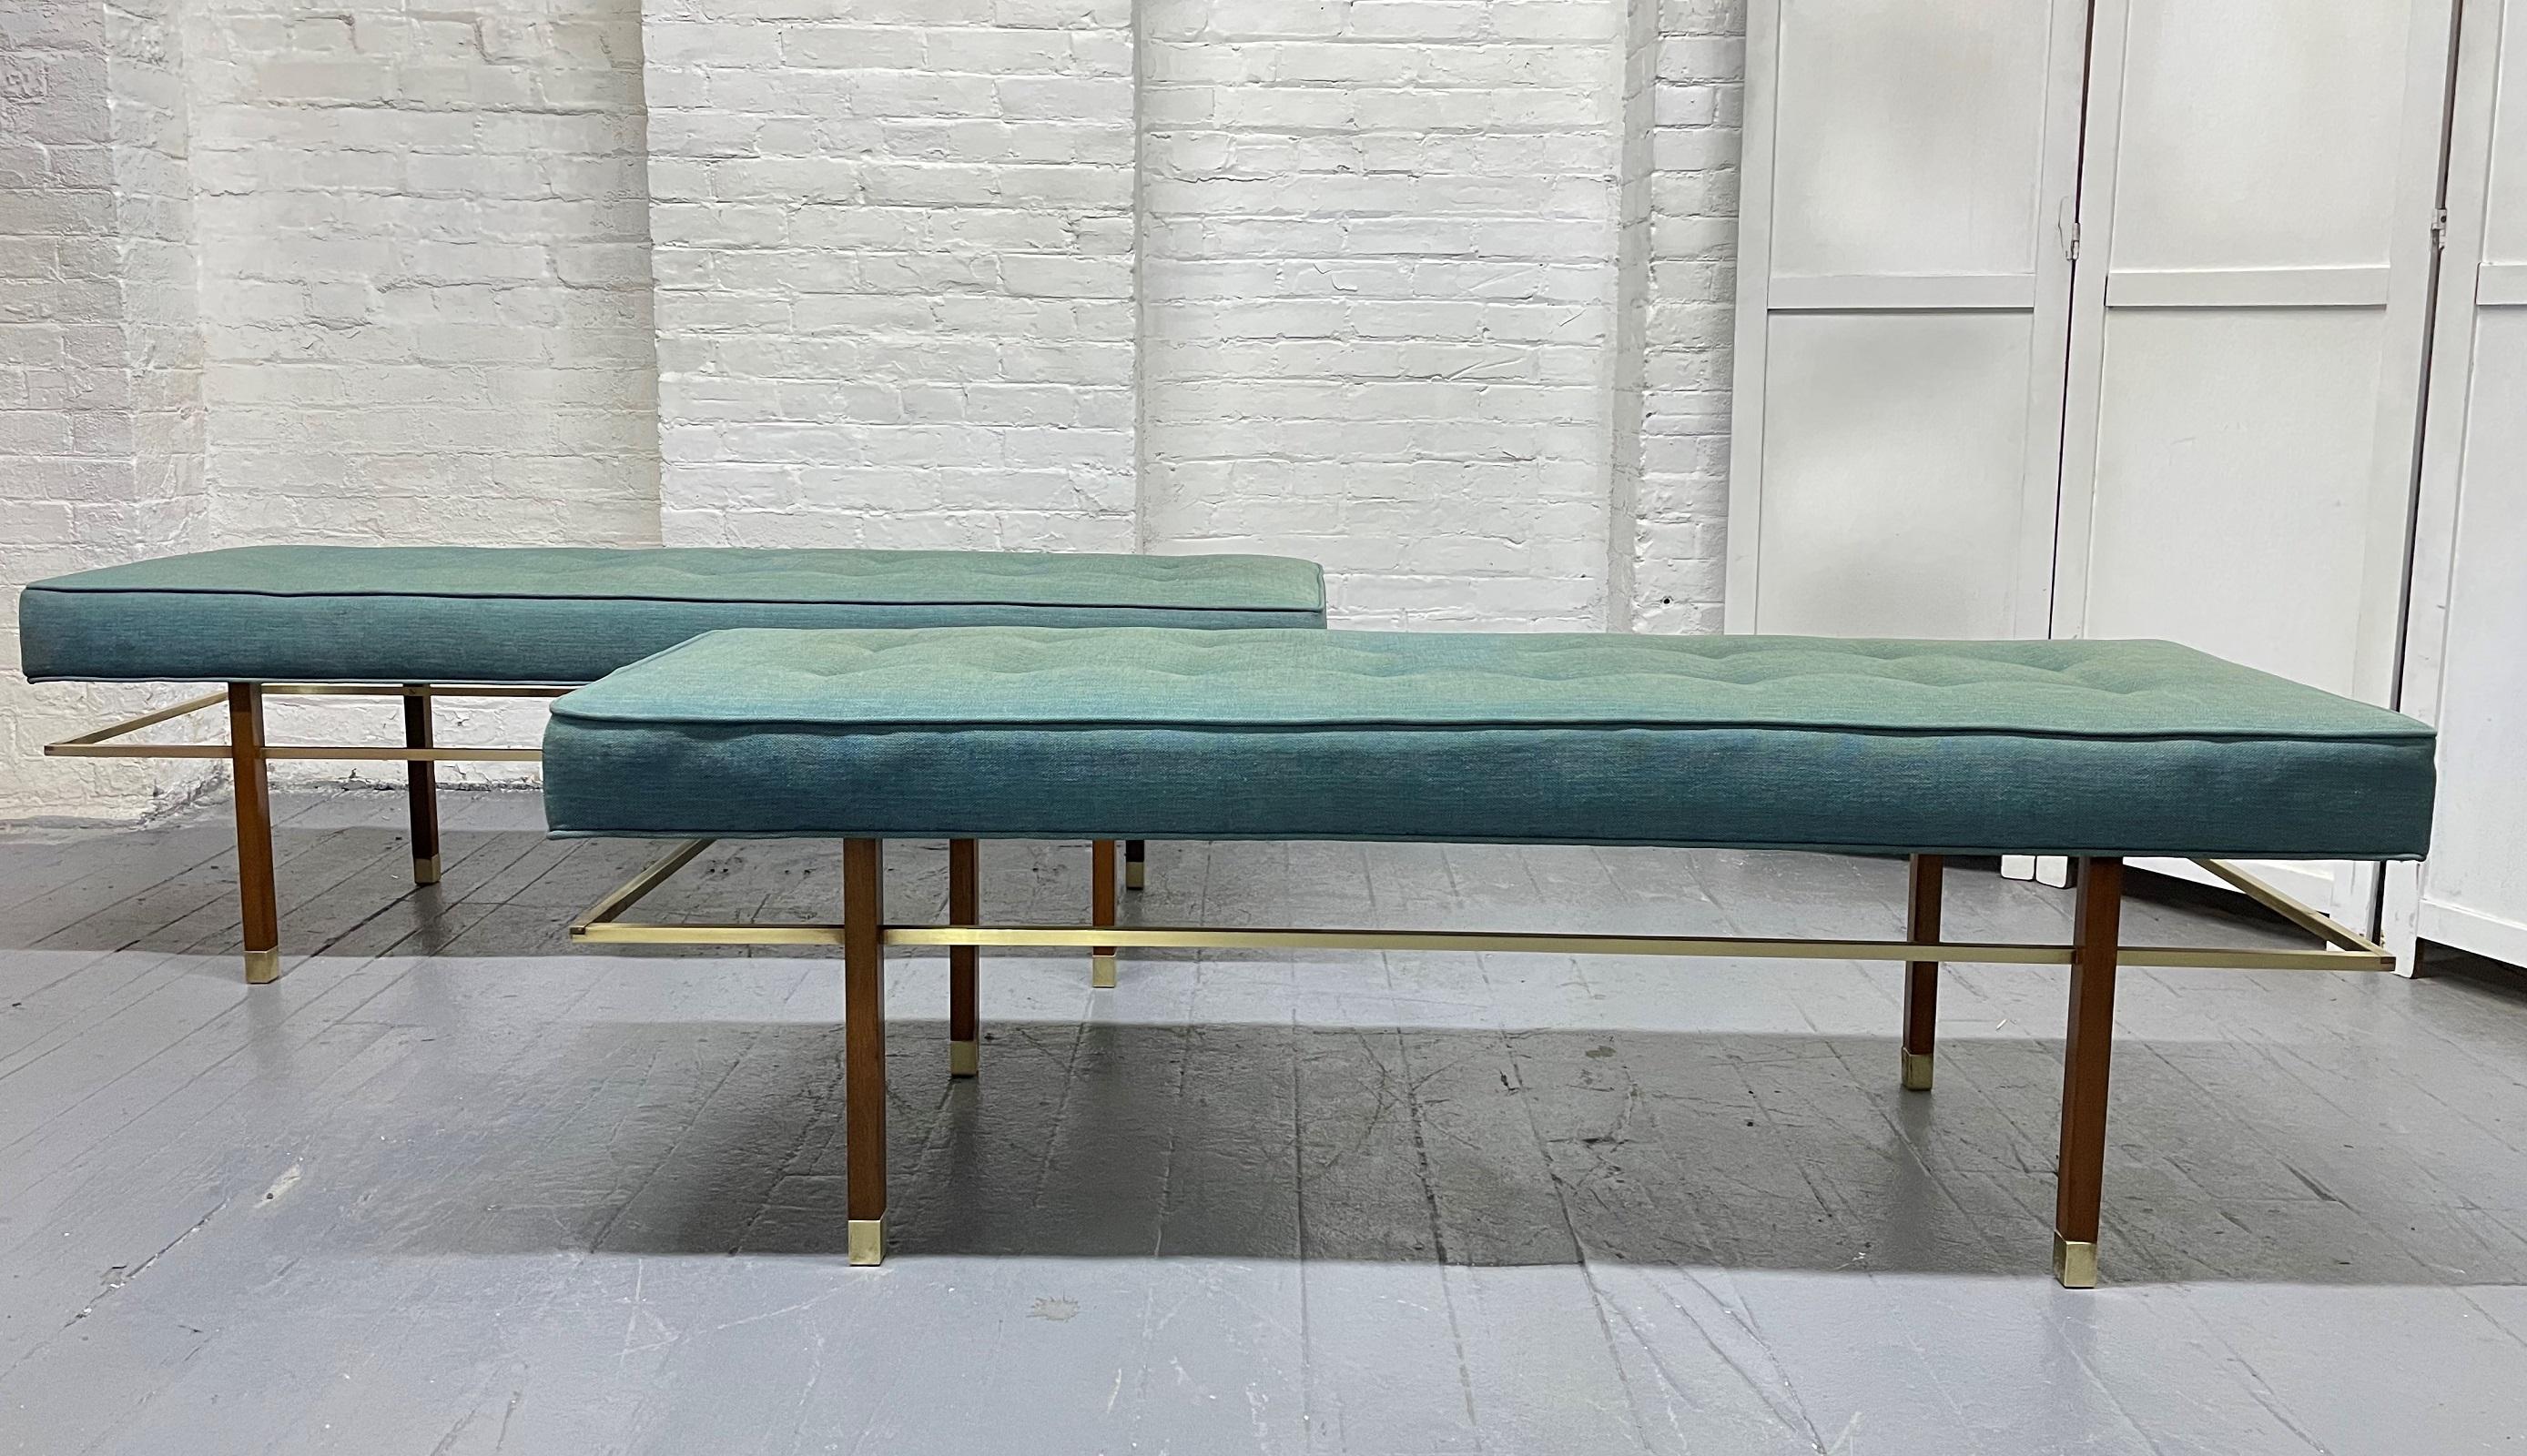 Pair of 1950s Harvey Probber tufted benches. The benches have floating brass stretchers, mahogany legs and the original fabric.
As a reference, the bench is photographed in Harvey Probber catalogue, published 1950s.